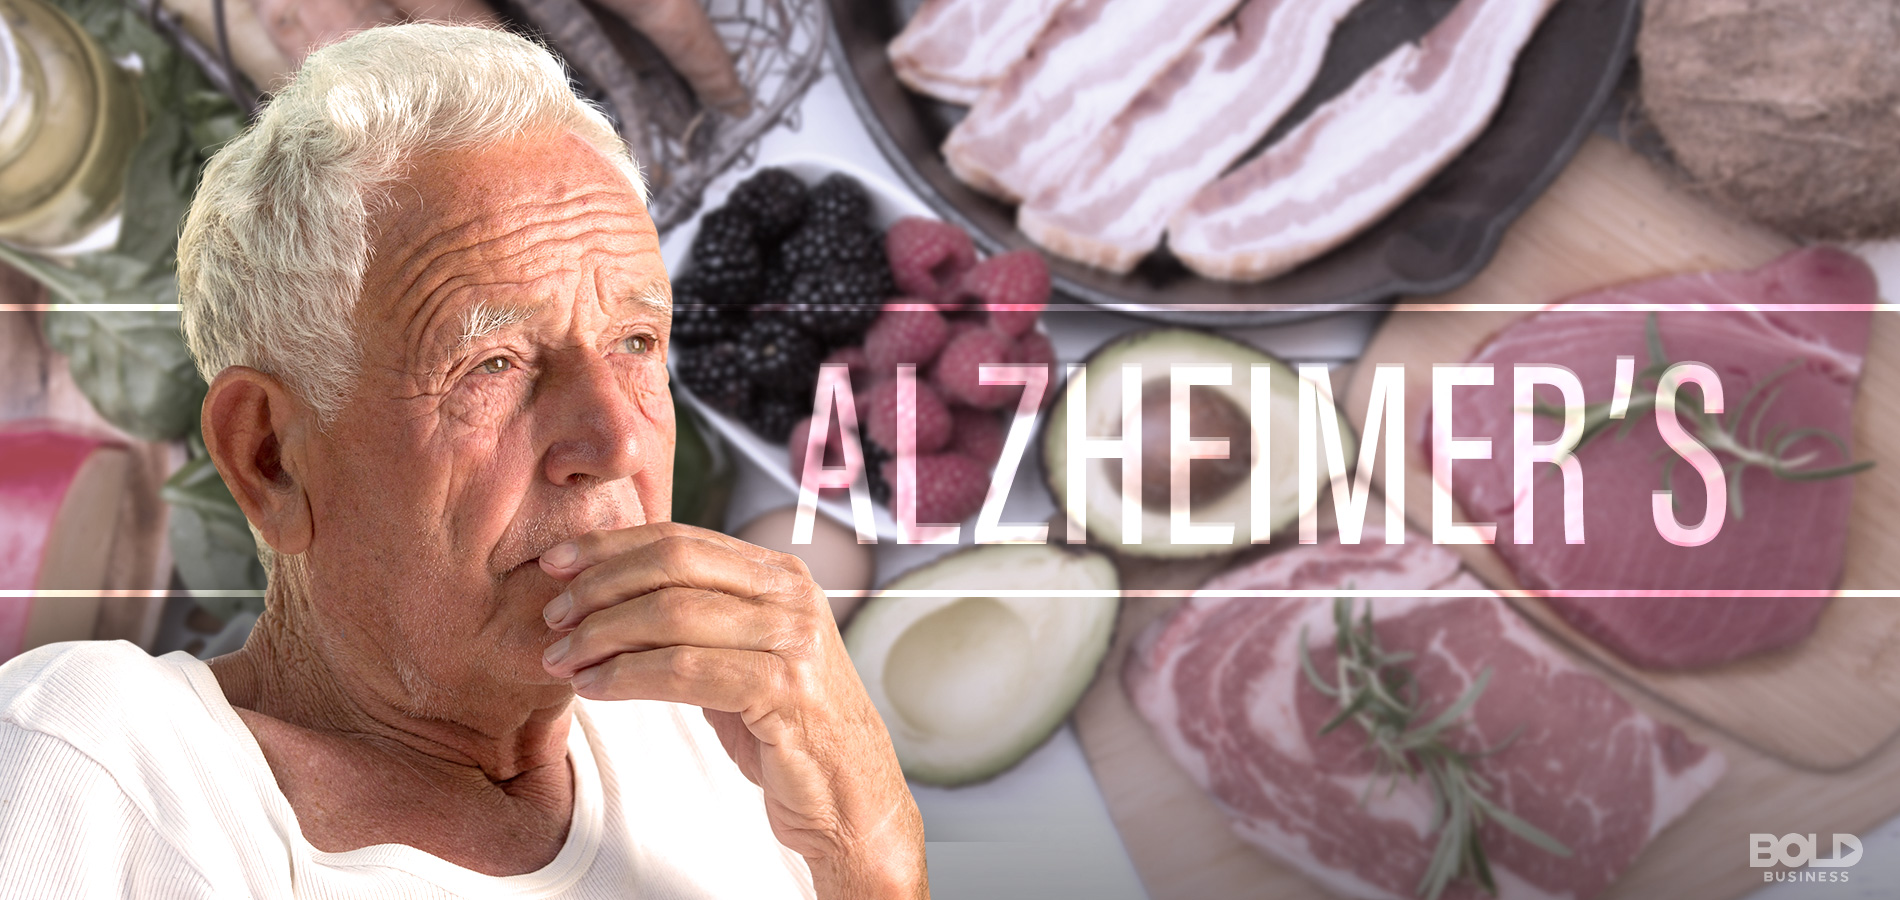 a photo of an elderly man set on a background photo of different kinds of food amid the ongoing talks concerning the risks of Alzheimer's disease